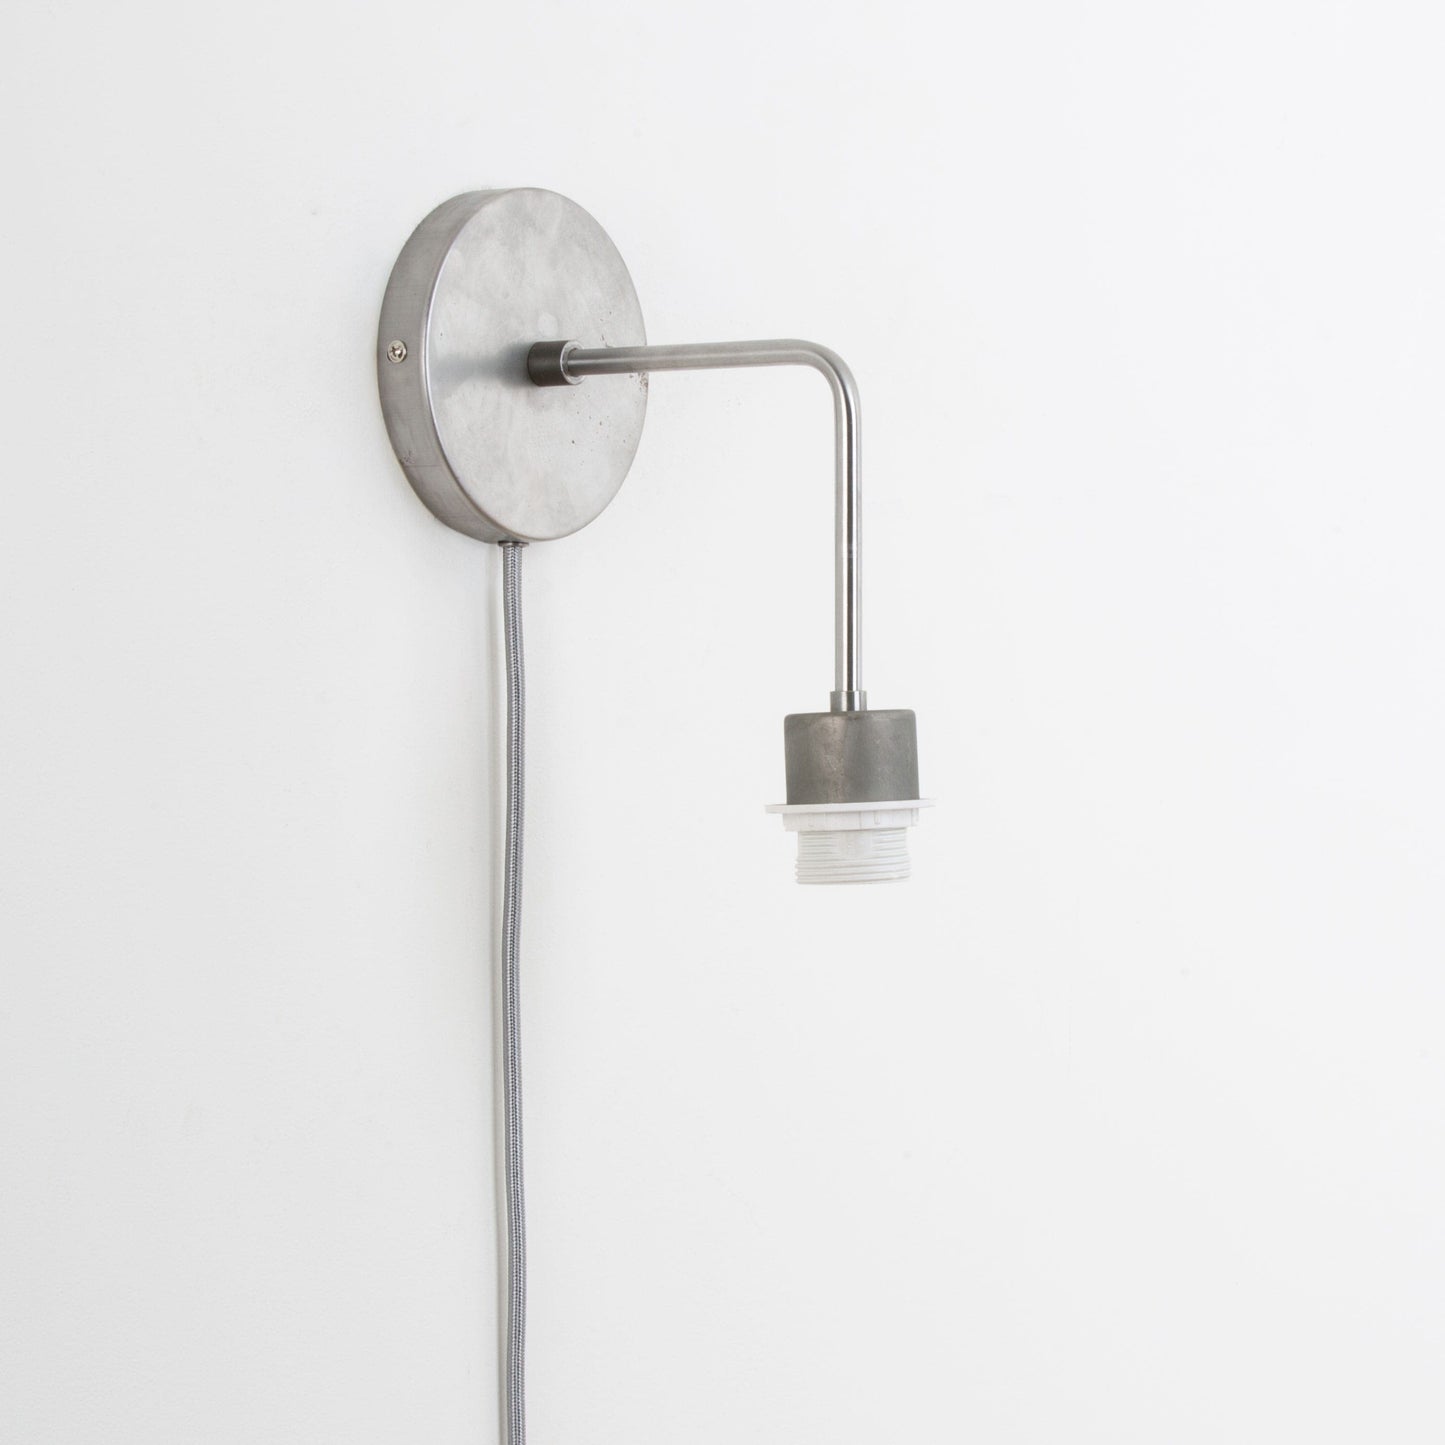 Plug-In Bend Solo Shade-Ready Sconce